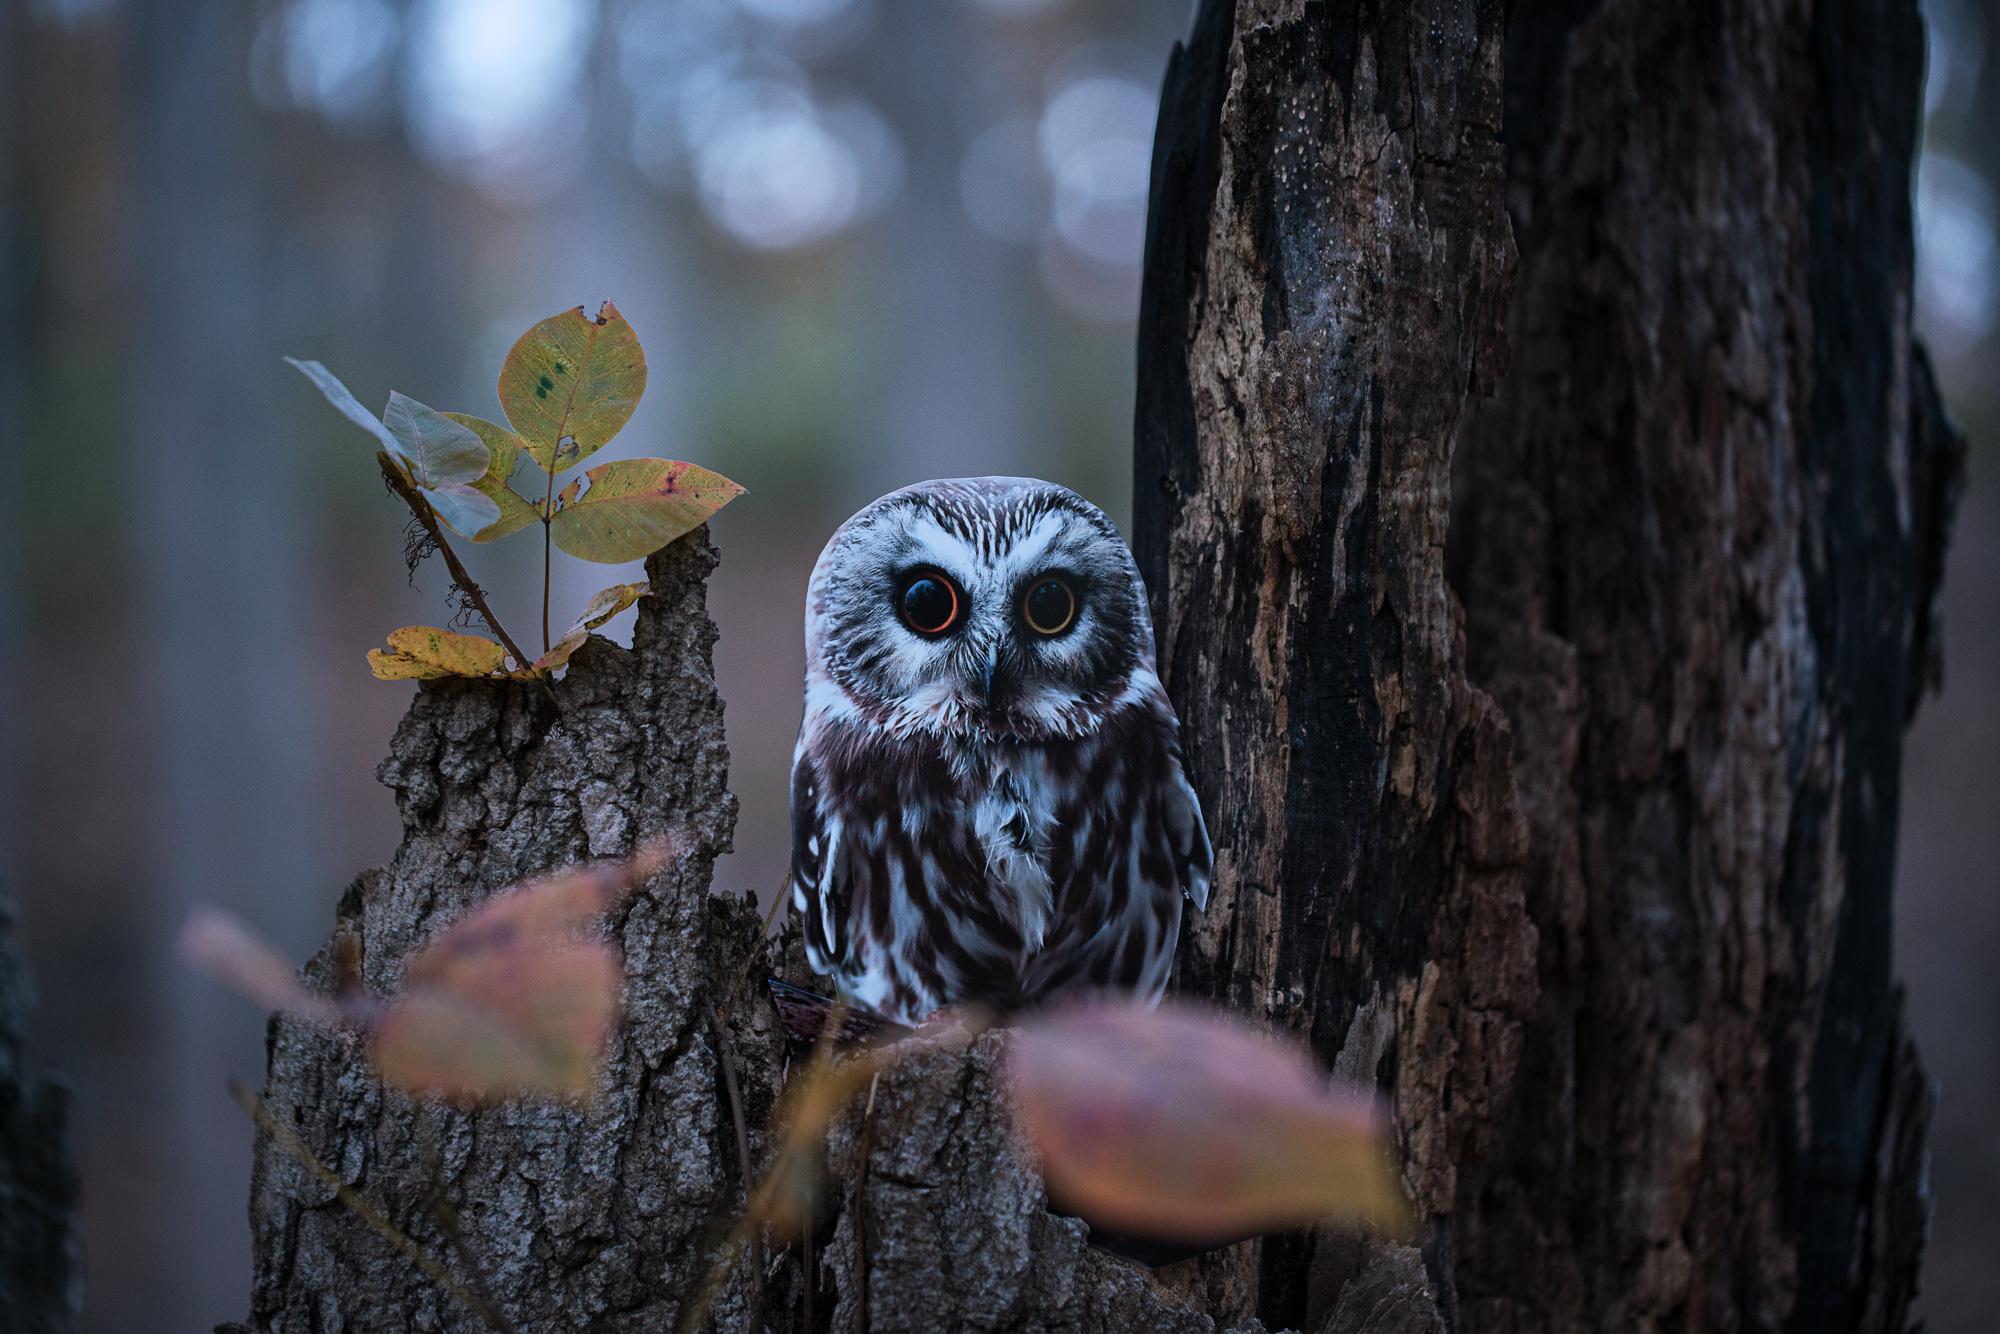 "Northern Saw-whet Owl"